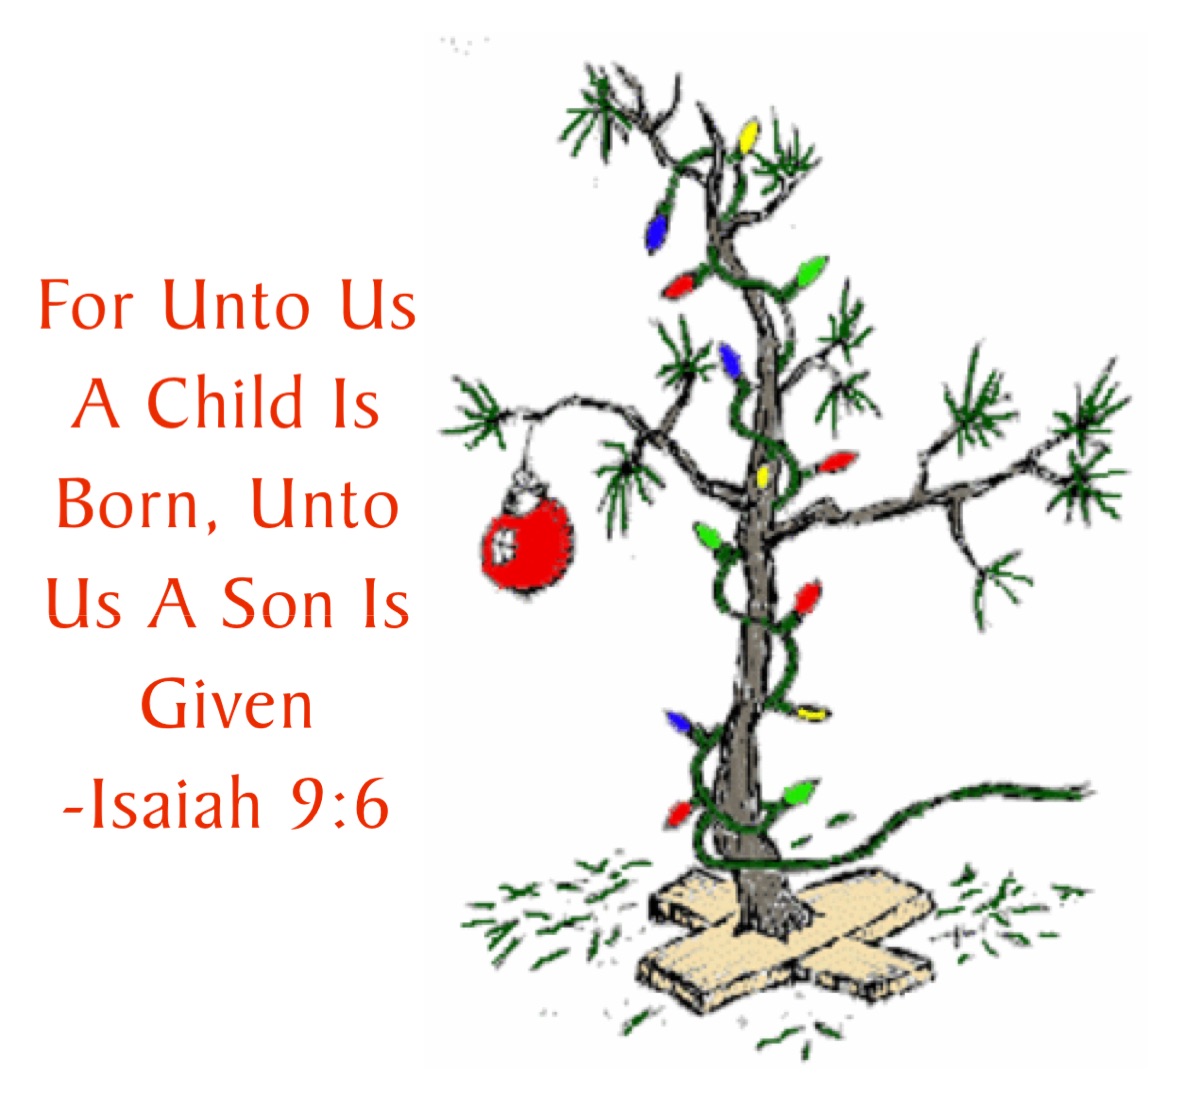 For Unto Us A Child Is Born, Unto Us A Son Is Given
-Isaiah 9:6